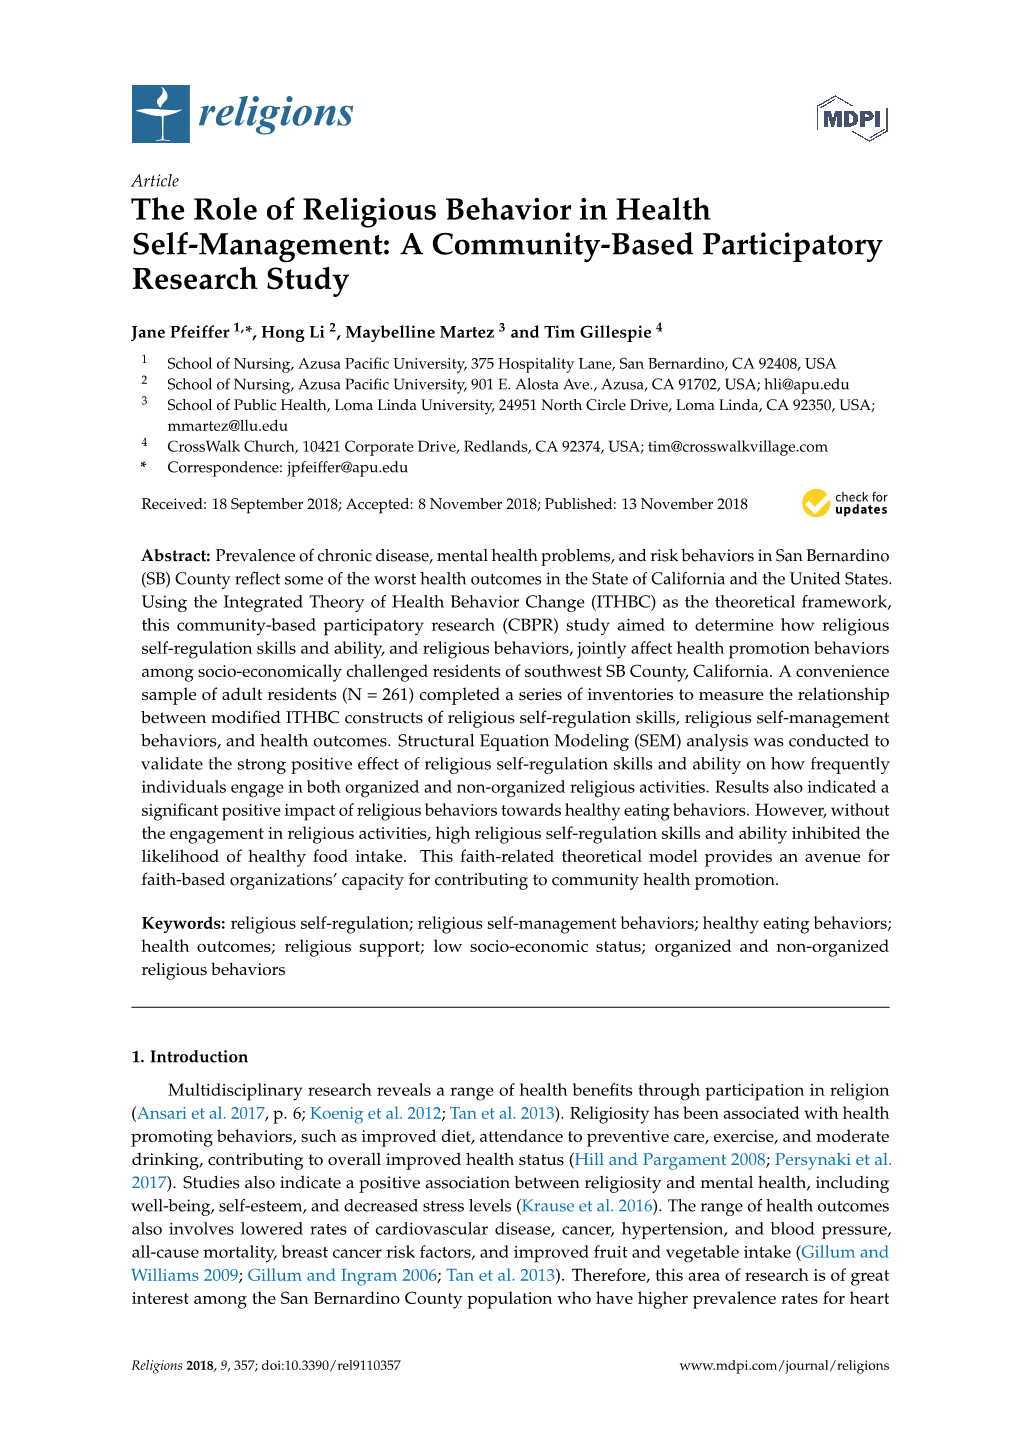 The Role of Religious Behavior in Health Self-Management: a Community-Based Participatory Research Study